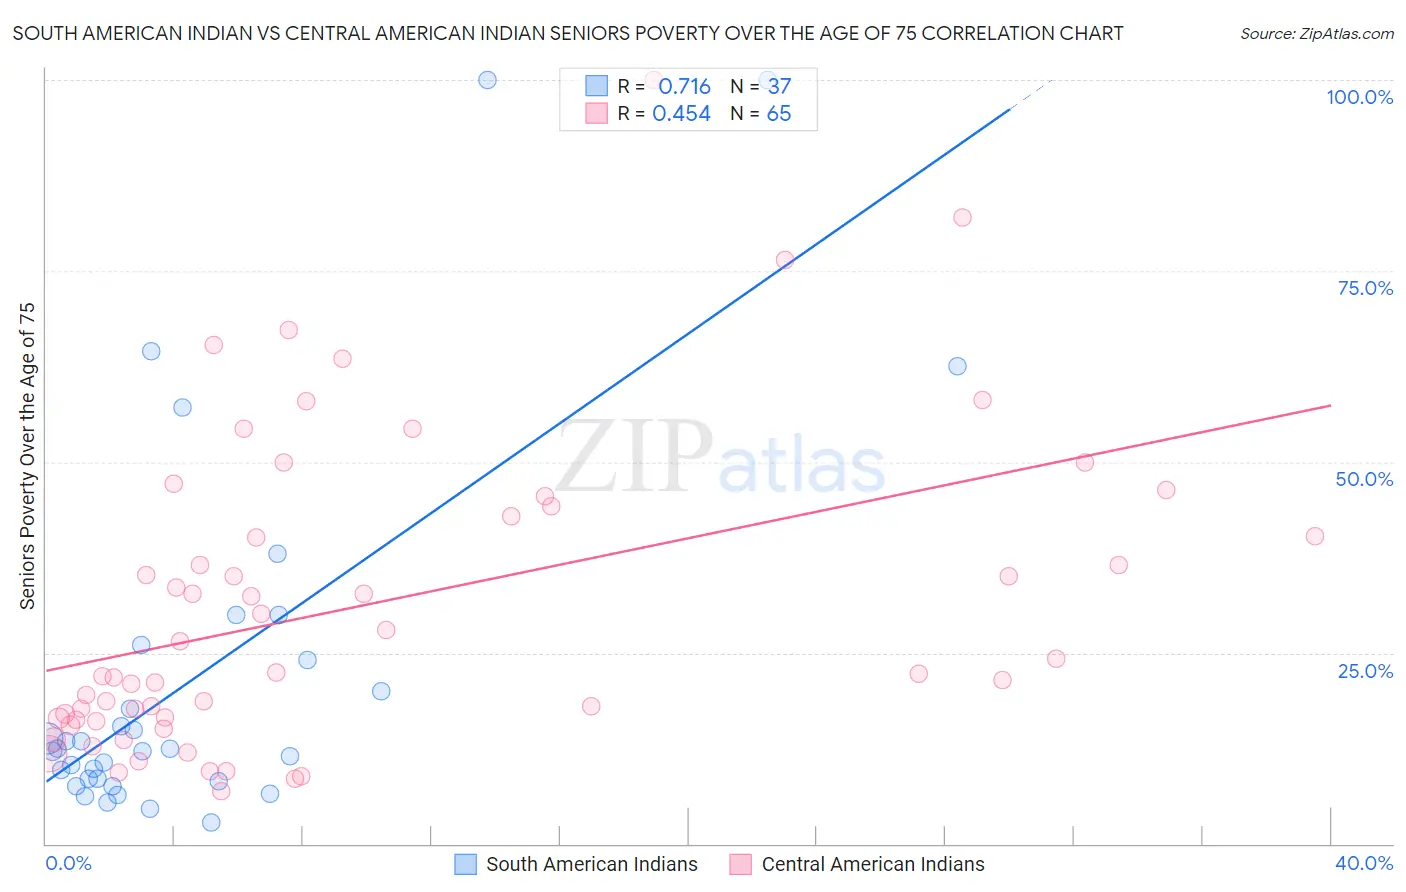 South American Indian vs Central American Indian Seniors Poverty Over the Age of 75